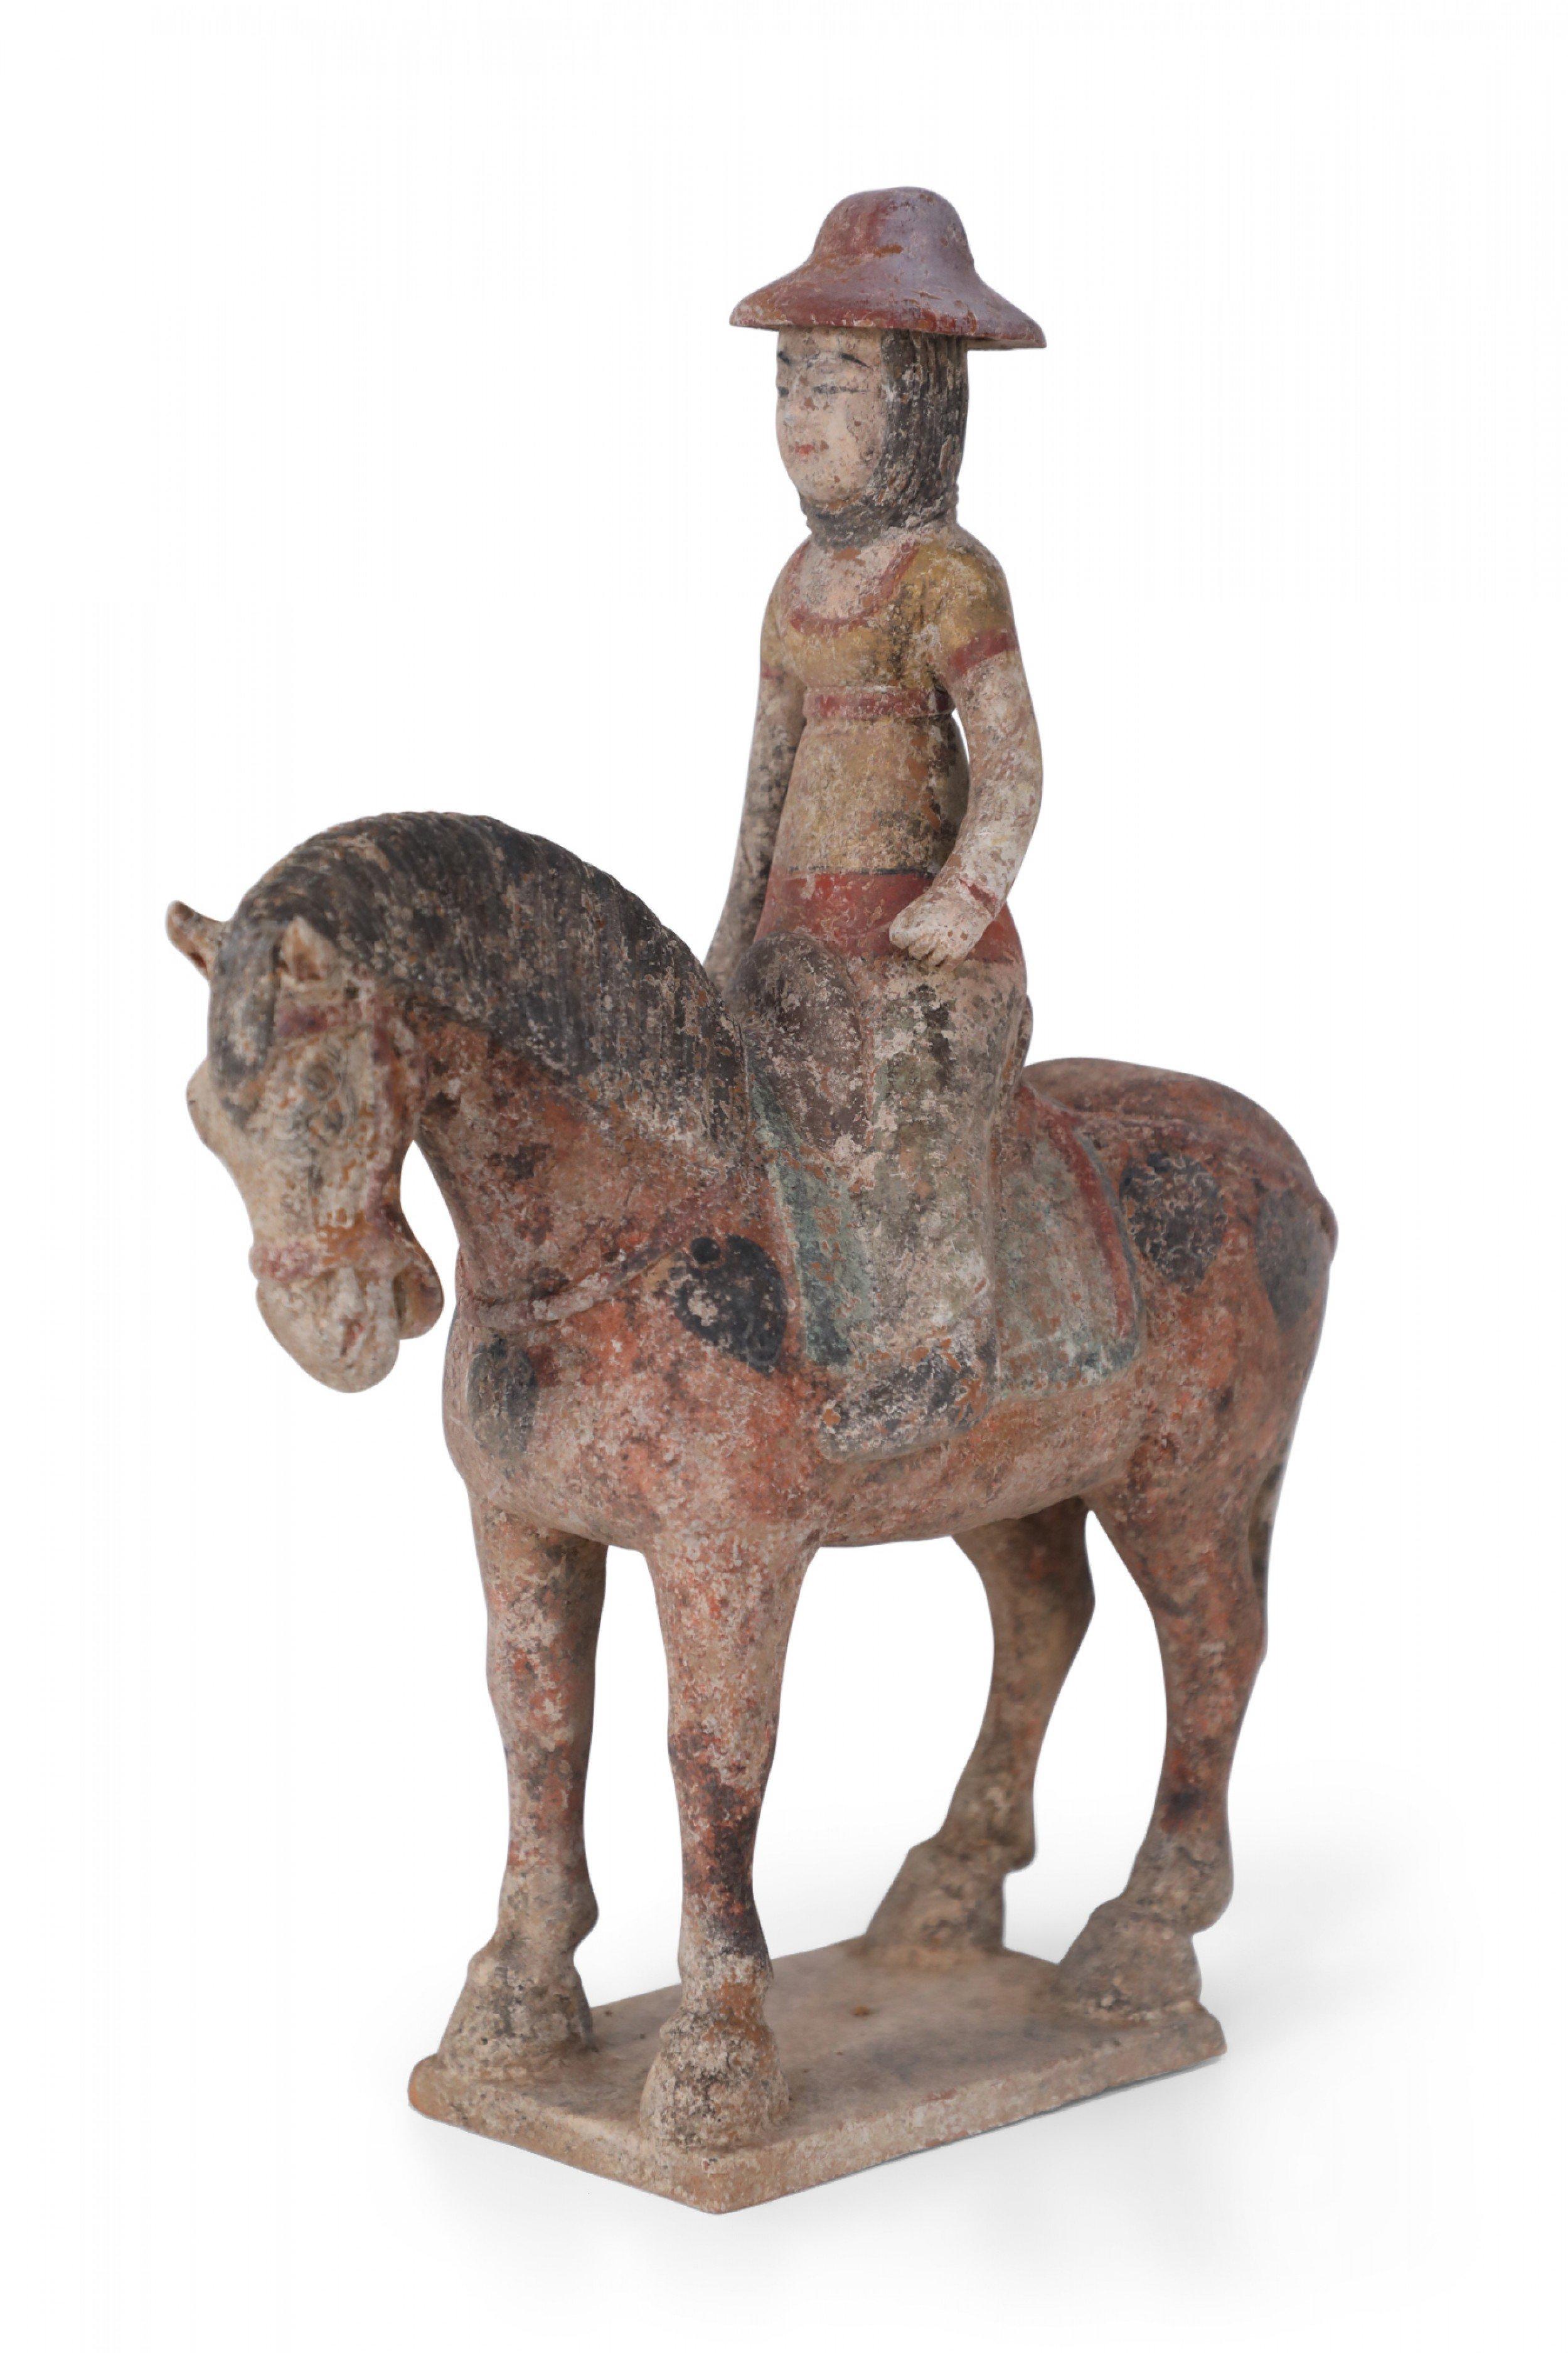 Antique Chinese Tang Dynasty-style terra cotta tomb figure of a girl wearing a red hat riding a brown horse, standing on a textured base.
 